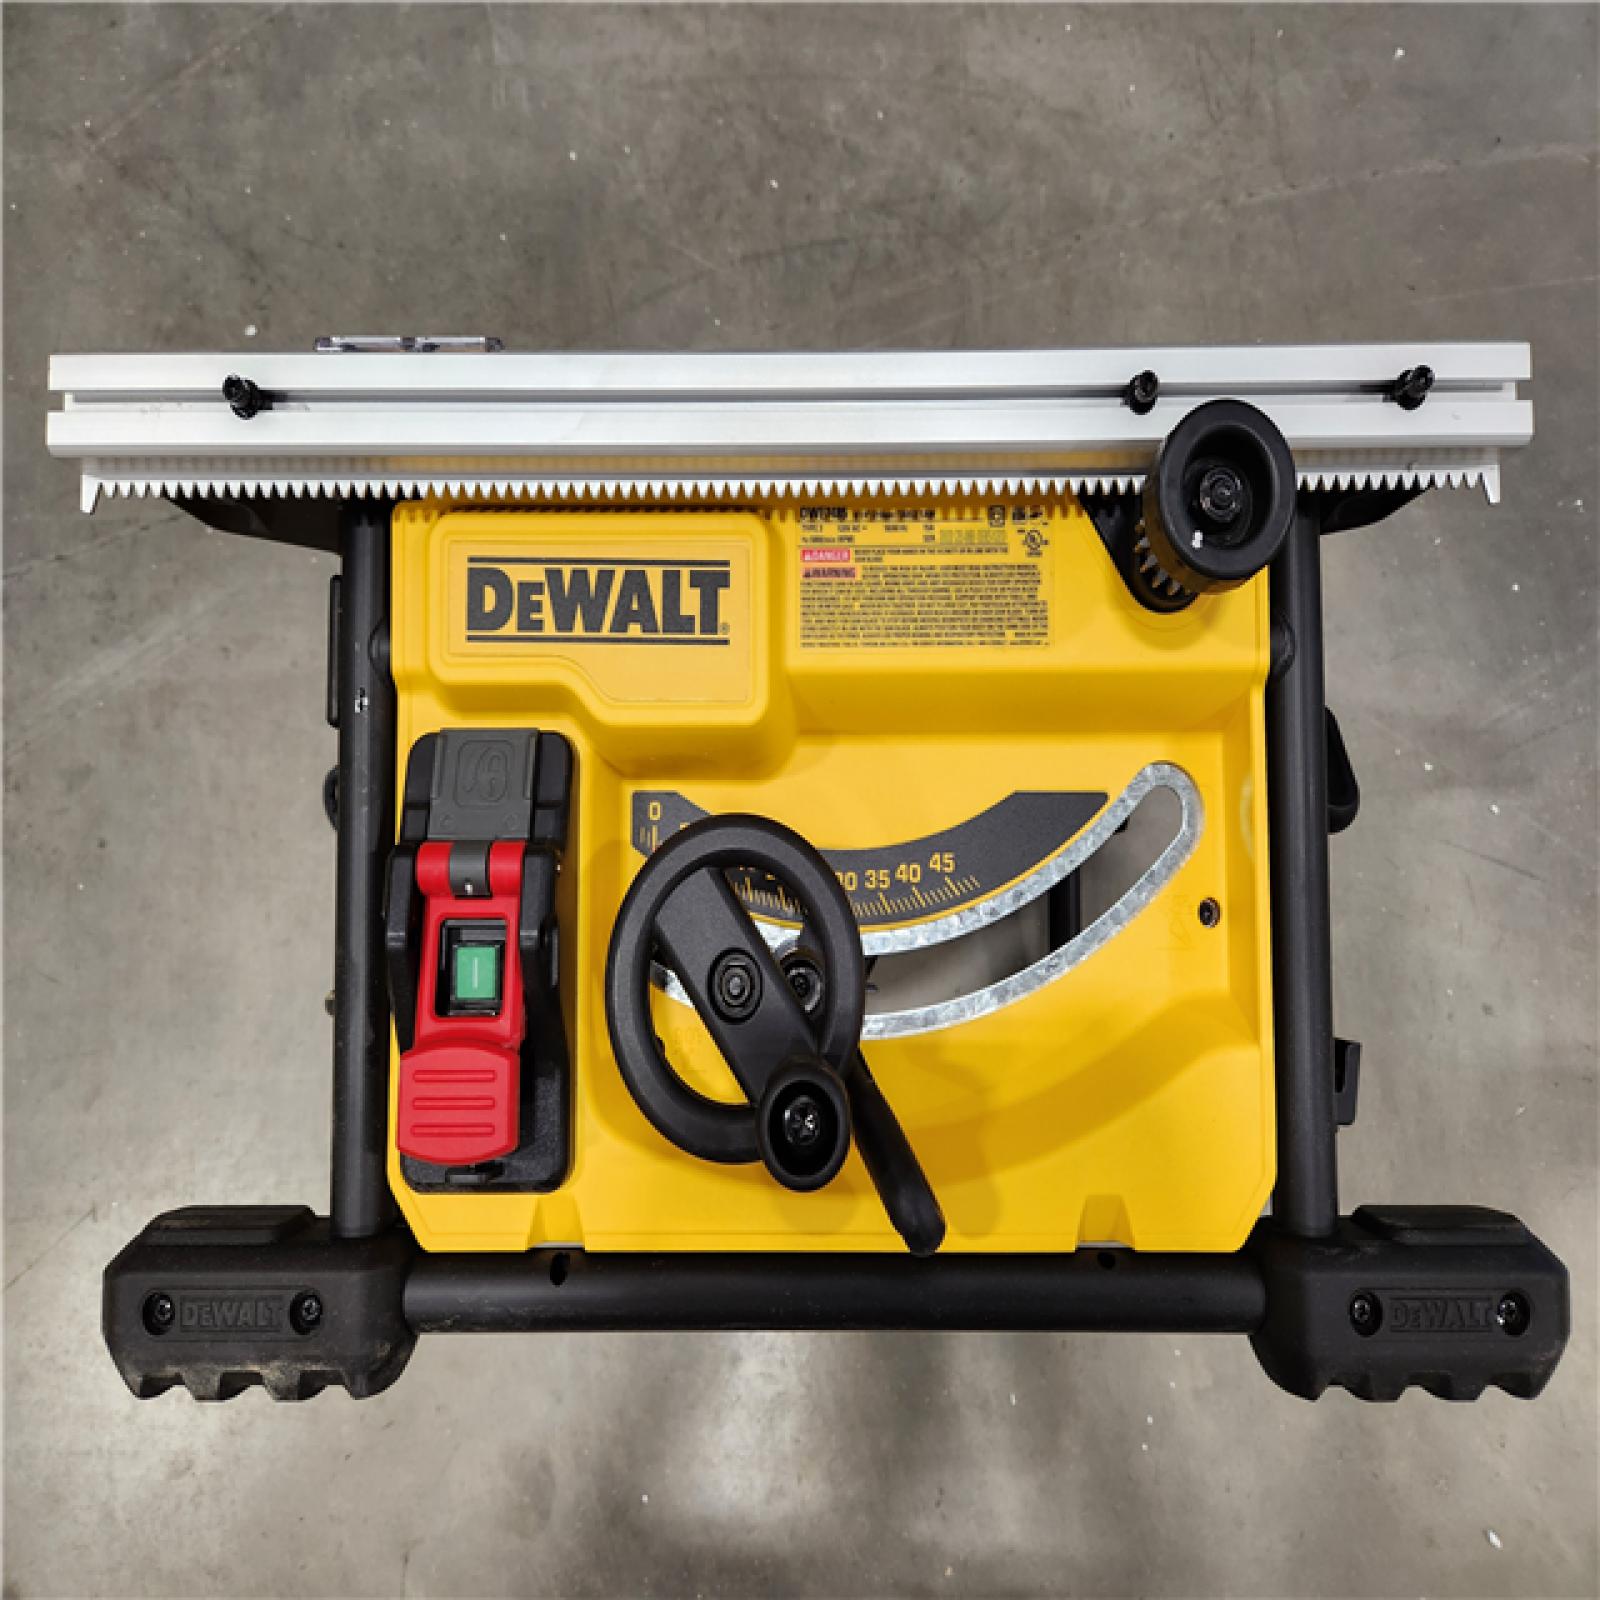 AS-IS DEWALT 15 Amp Corded 8-1/4 in. Compact Portable Jobsite Table Saw